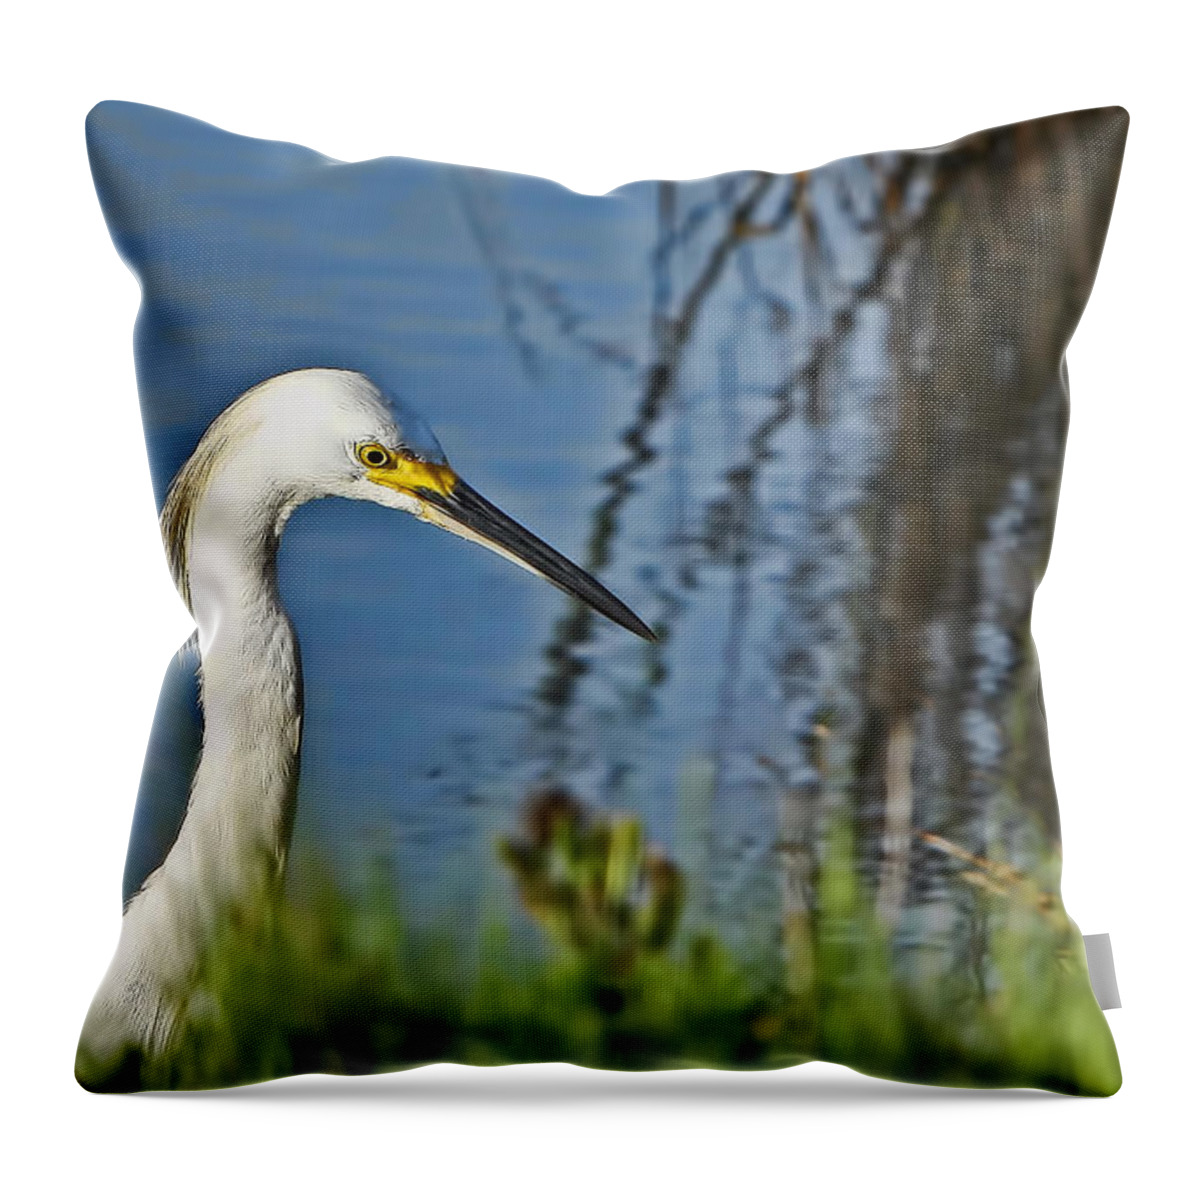 Island Throw Pillow featuring the photograph Focused by Gary Holmes